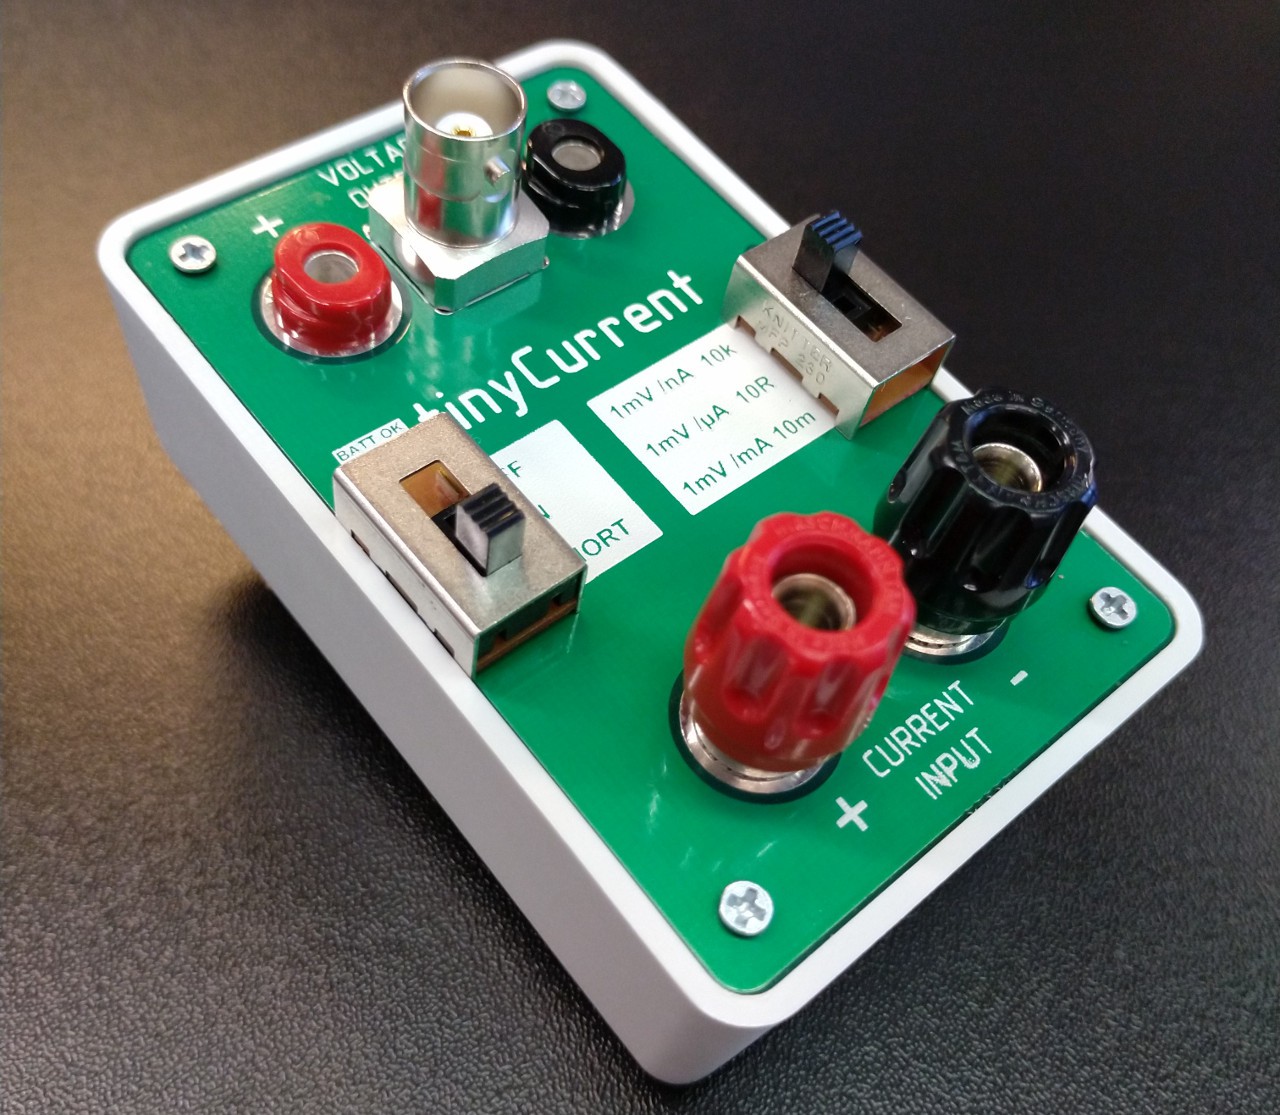 Tinycurrent-R low current measurement desvío and amplifier ucurrent Gold Clone